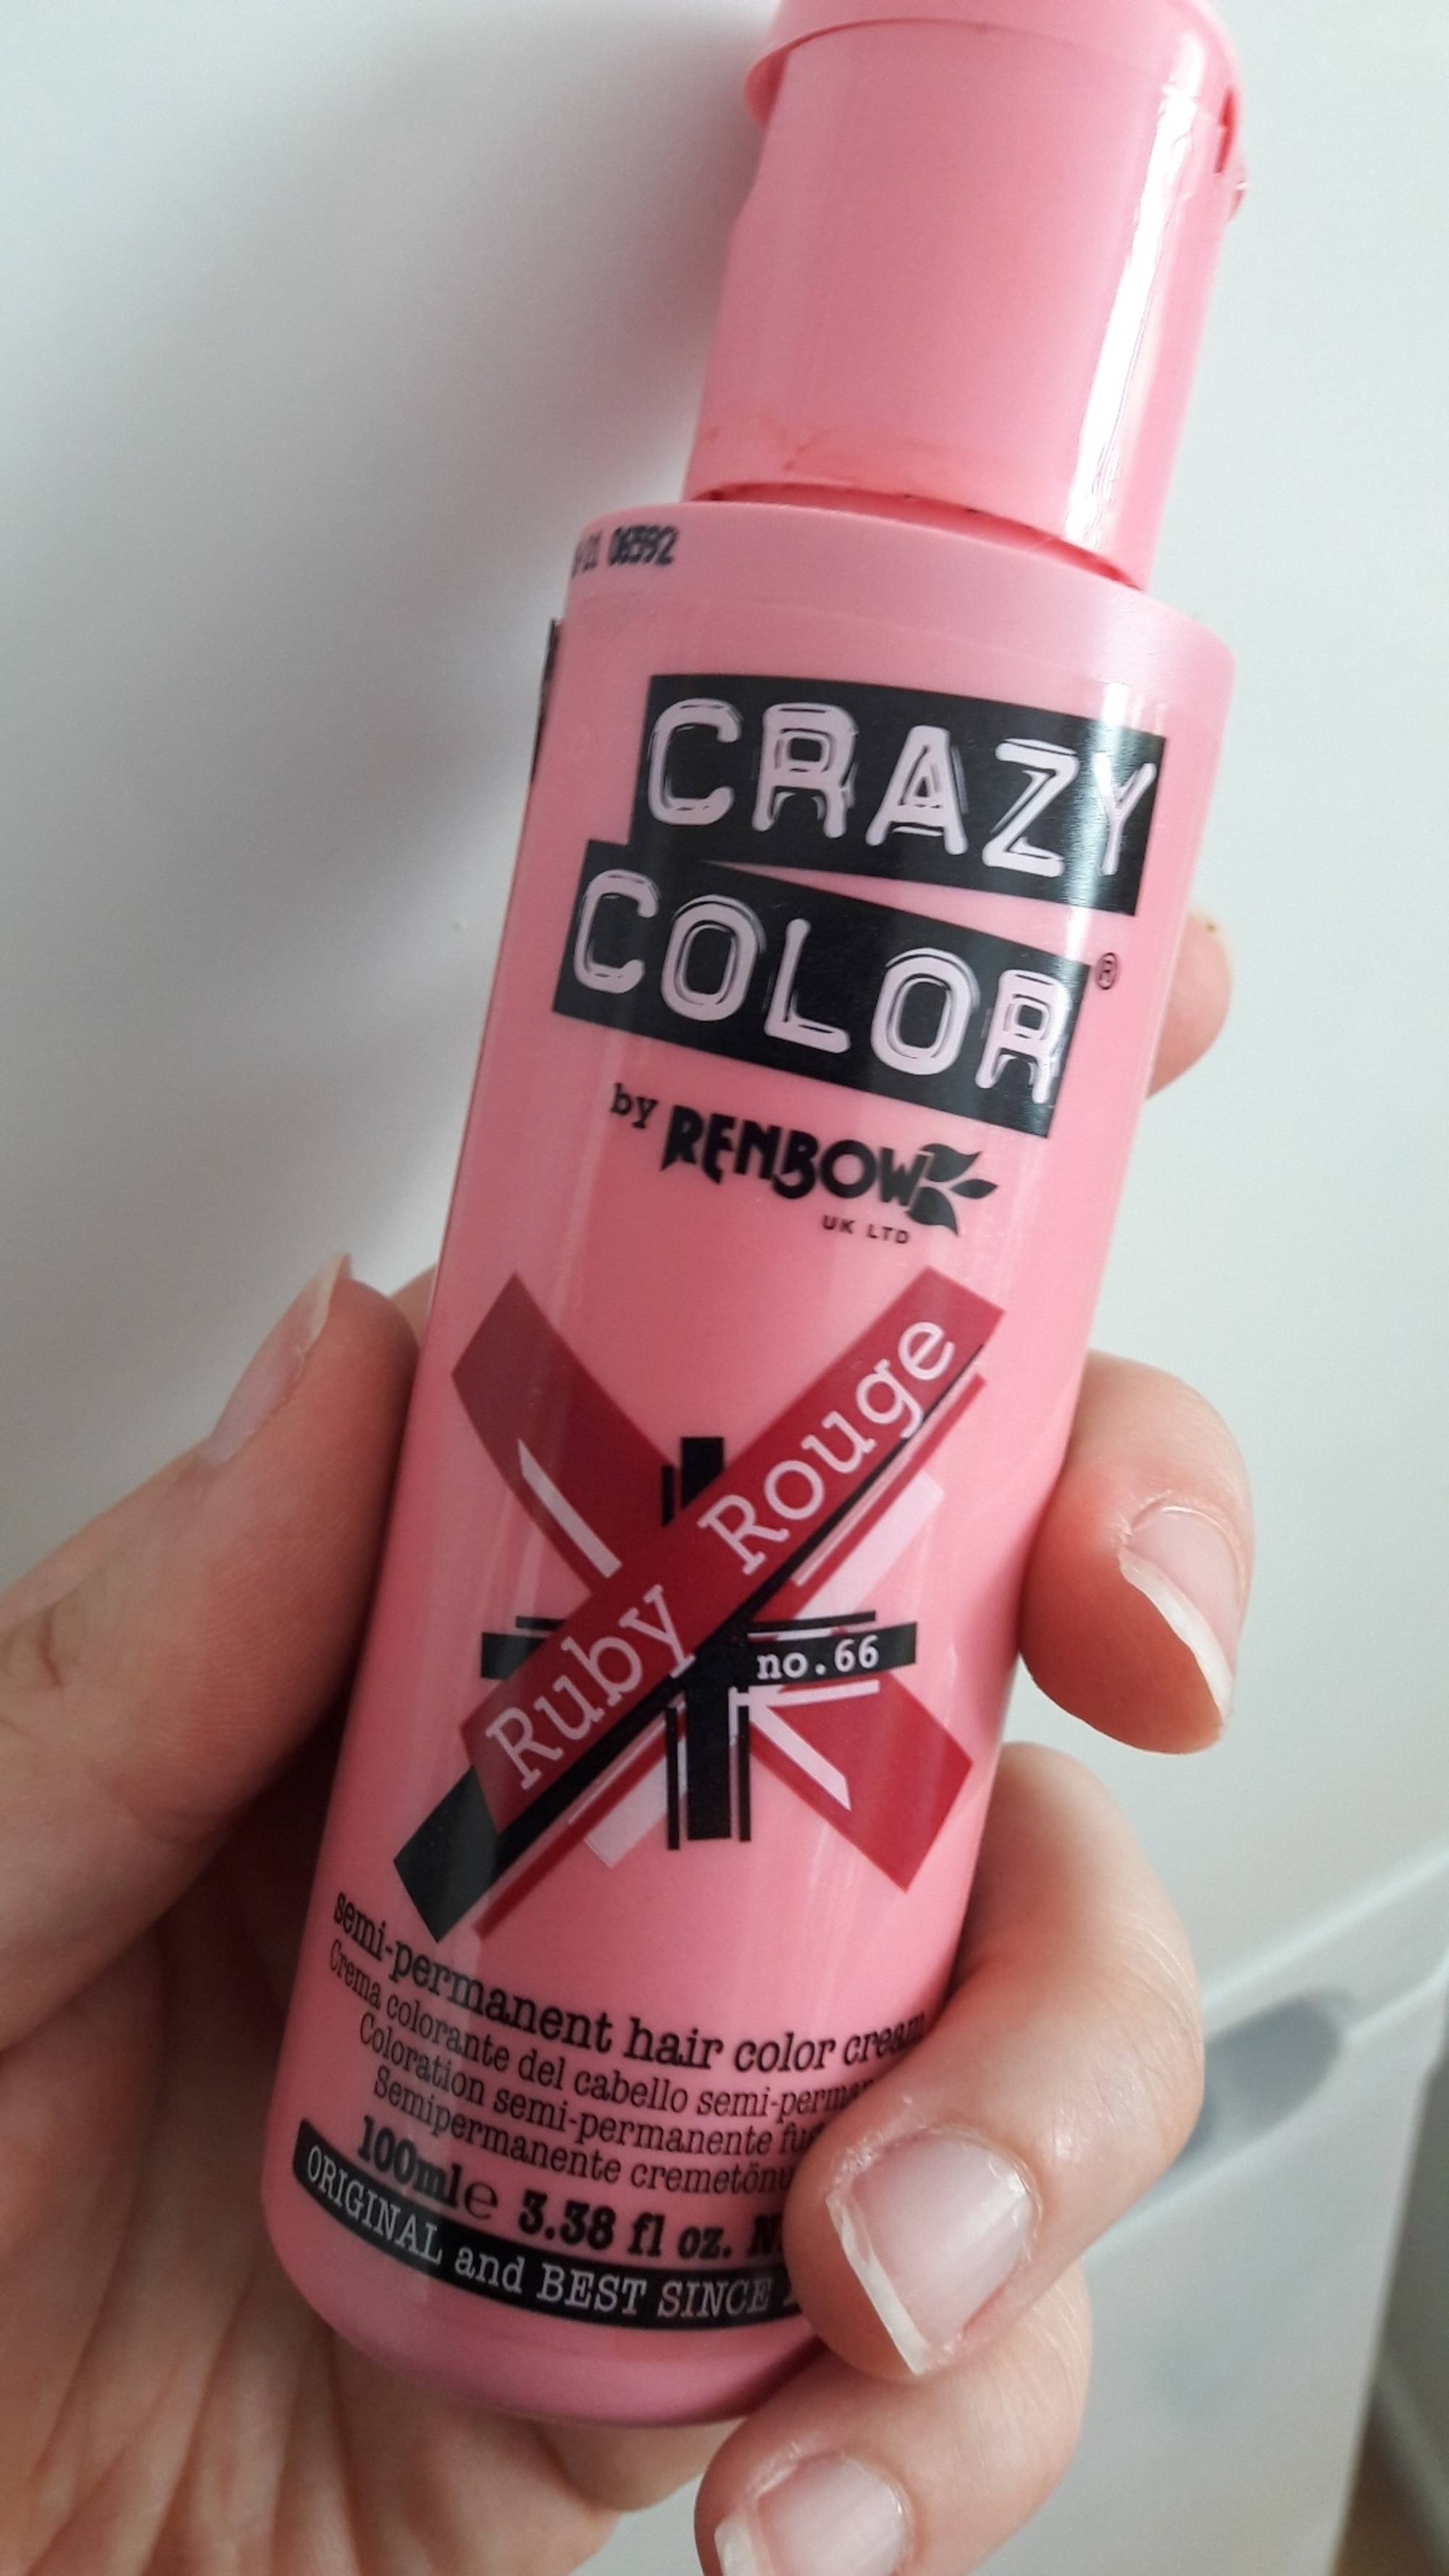 CRAZY COLOR - Rembow - Ruby rouge semi-permanent hair color